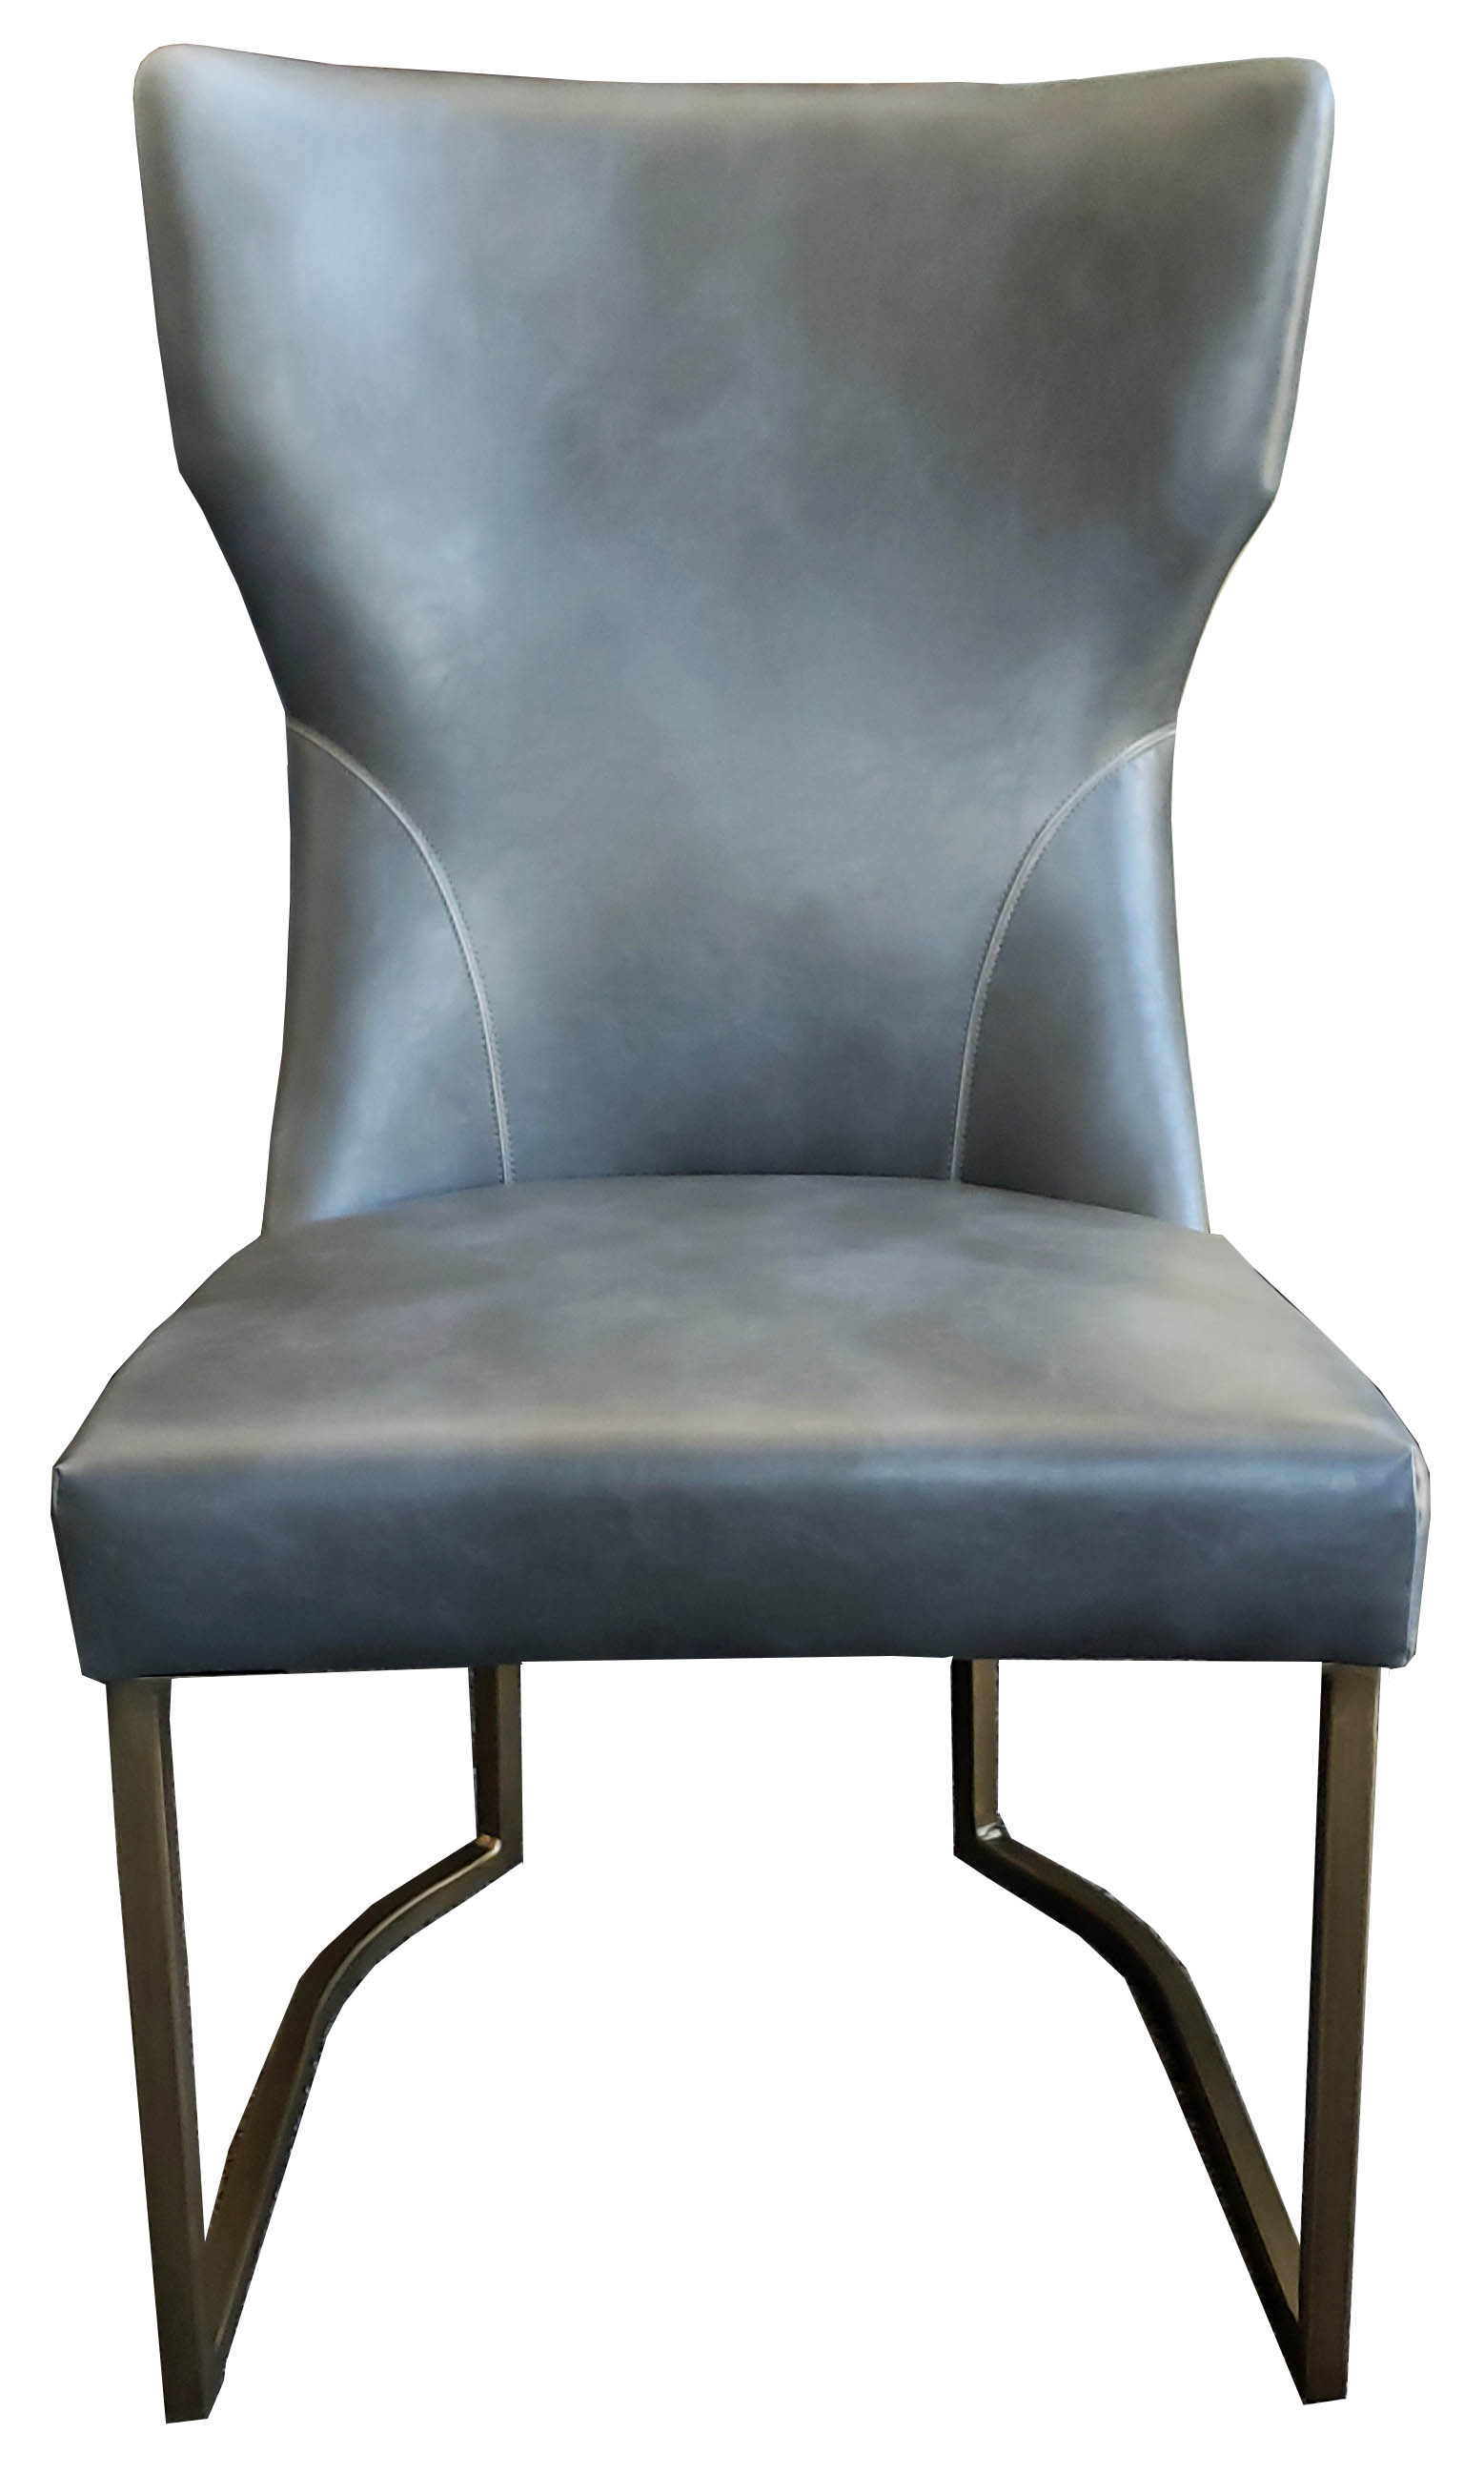 Grey Leather Dining Chair W Fabric Back, Leather Fabric For Dining Chairs